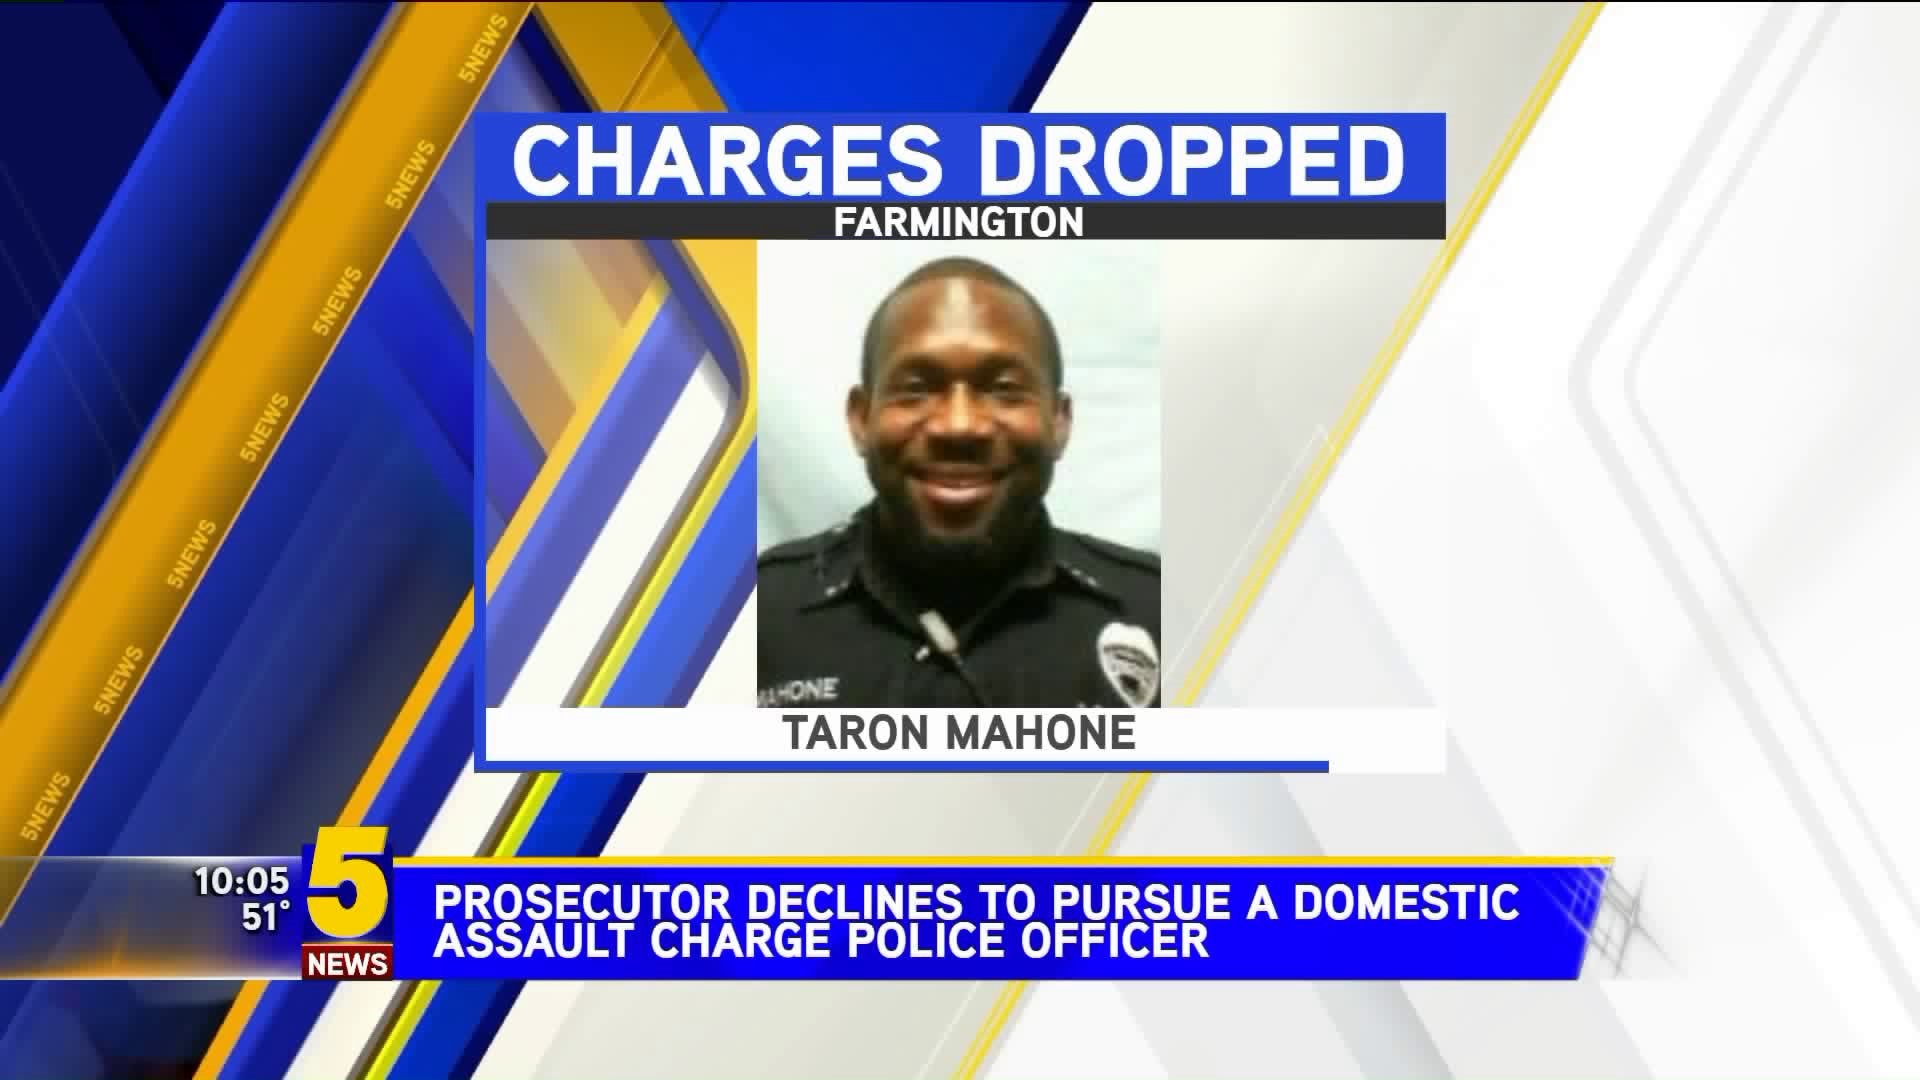 Prosecutor Declines To Pursue A Domestic Assault Charge on Police Officer